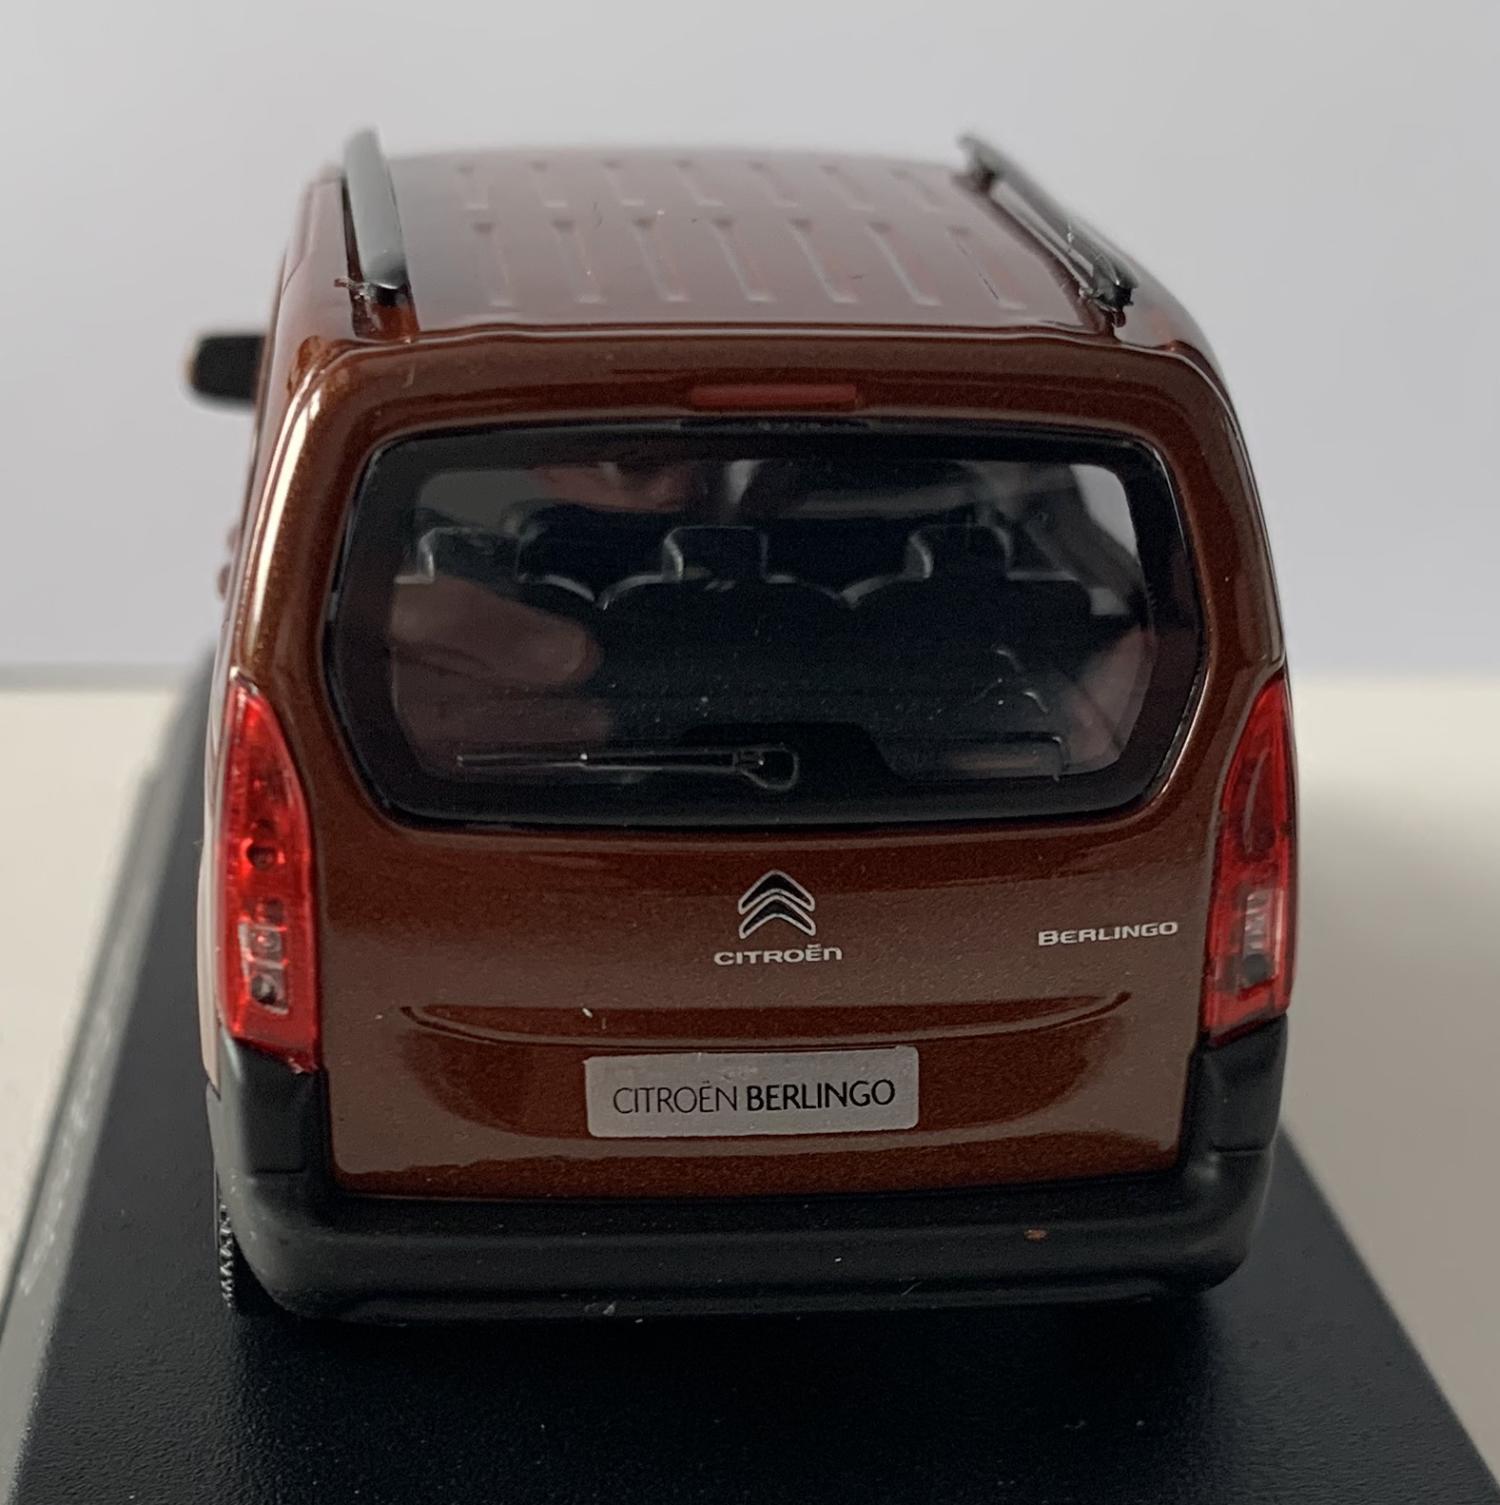 An excellent reproduction of the Citroen Berlingo with detail throughout, all authentically recreated.  Model is mounted on a removable plinth with a removable hard plastic cover